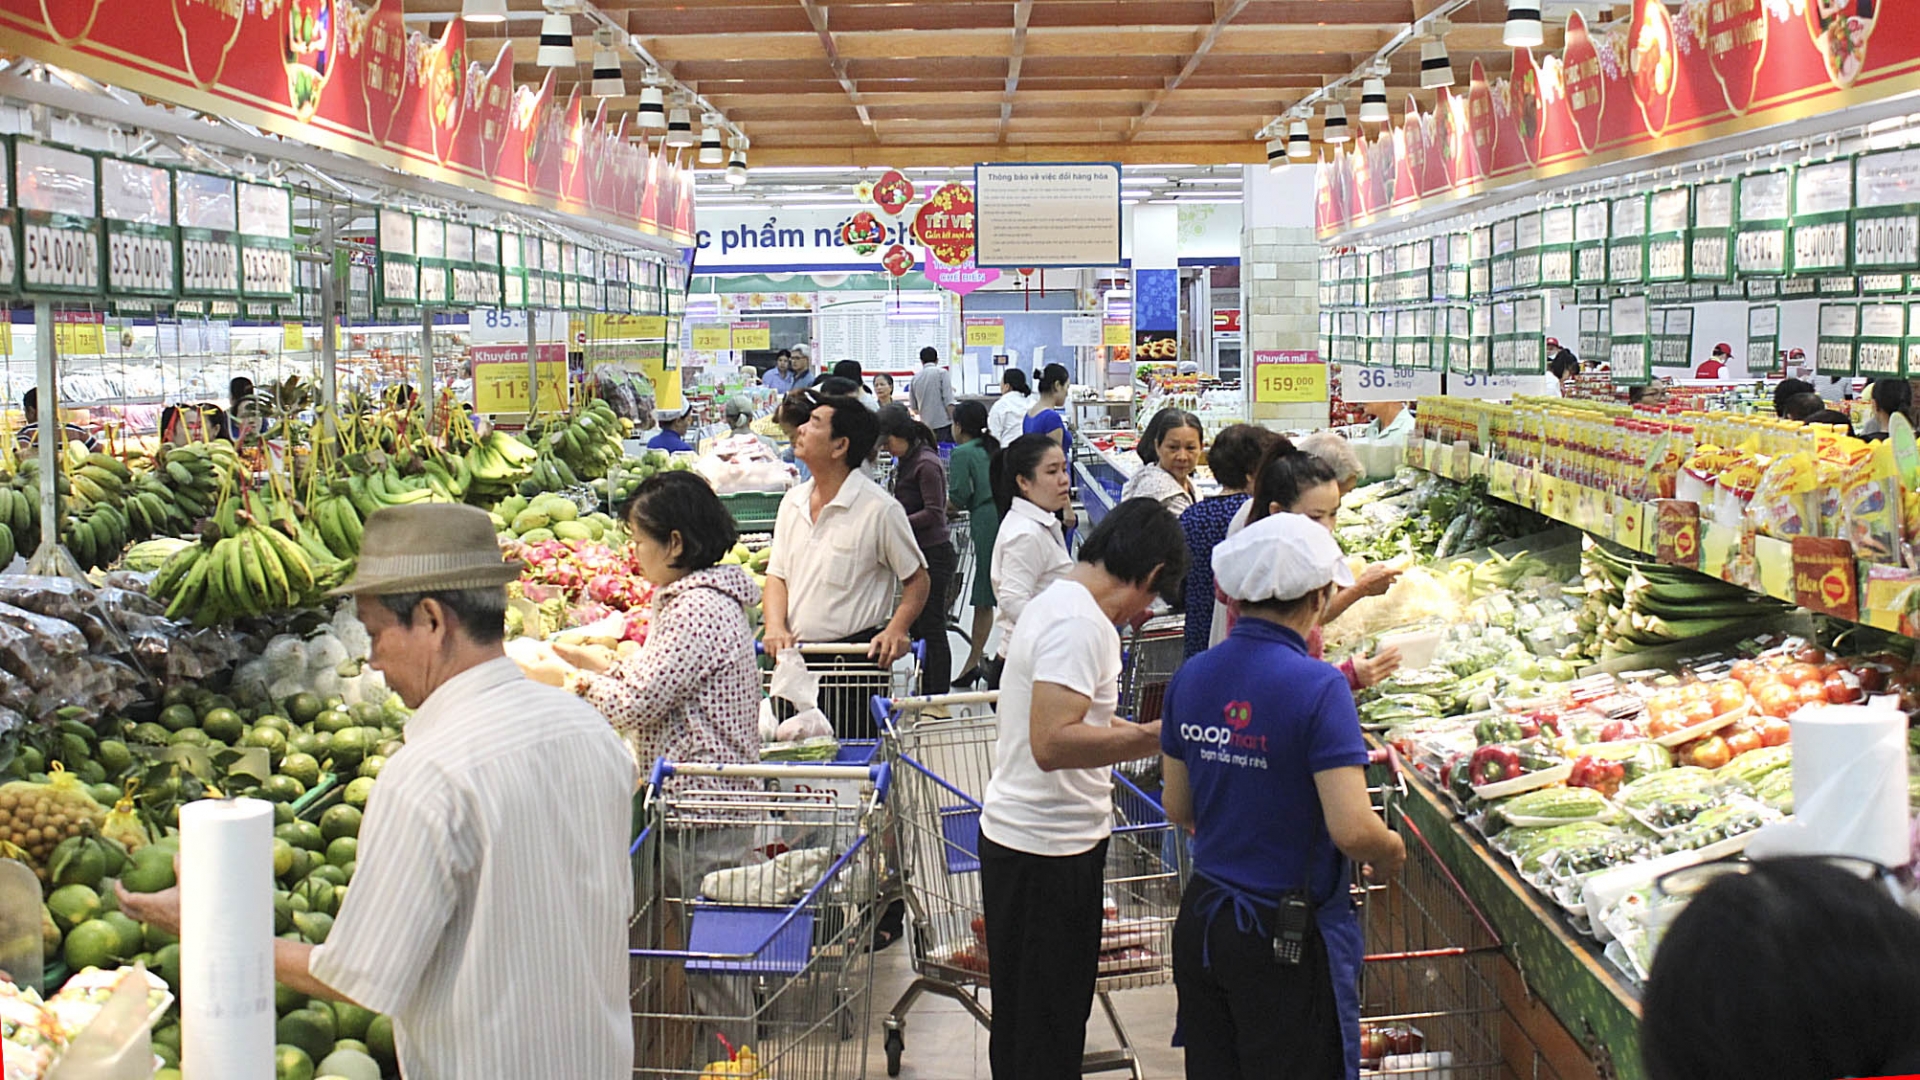 Big C and Lotte Mart relegated in top 10 retailers of Vietnam